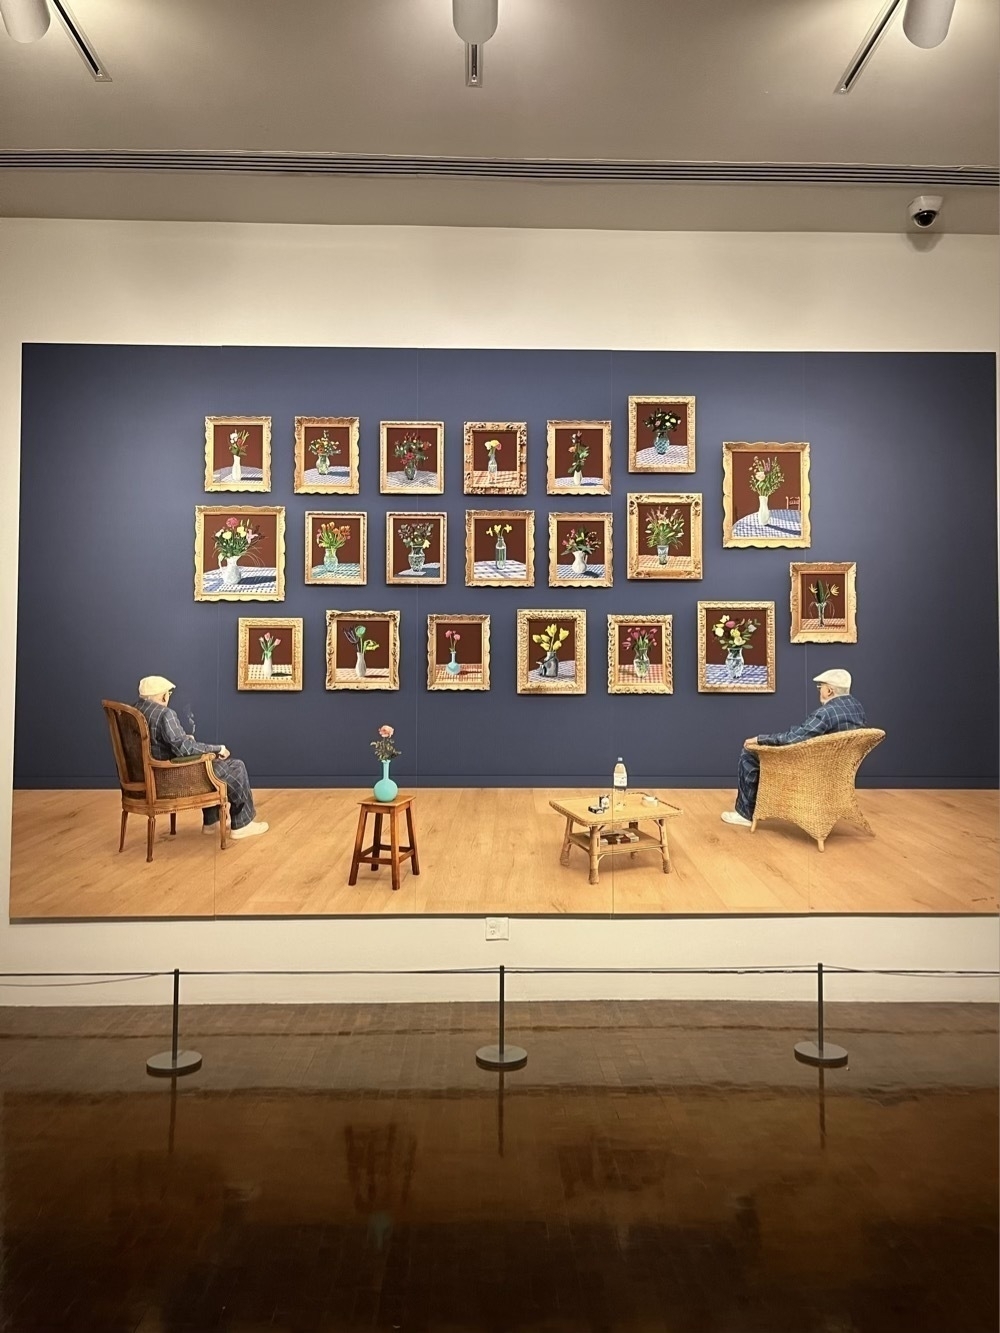 A huge David Hockney painting with two images of himself sat in chairs viewing prints that he has created.